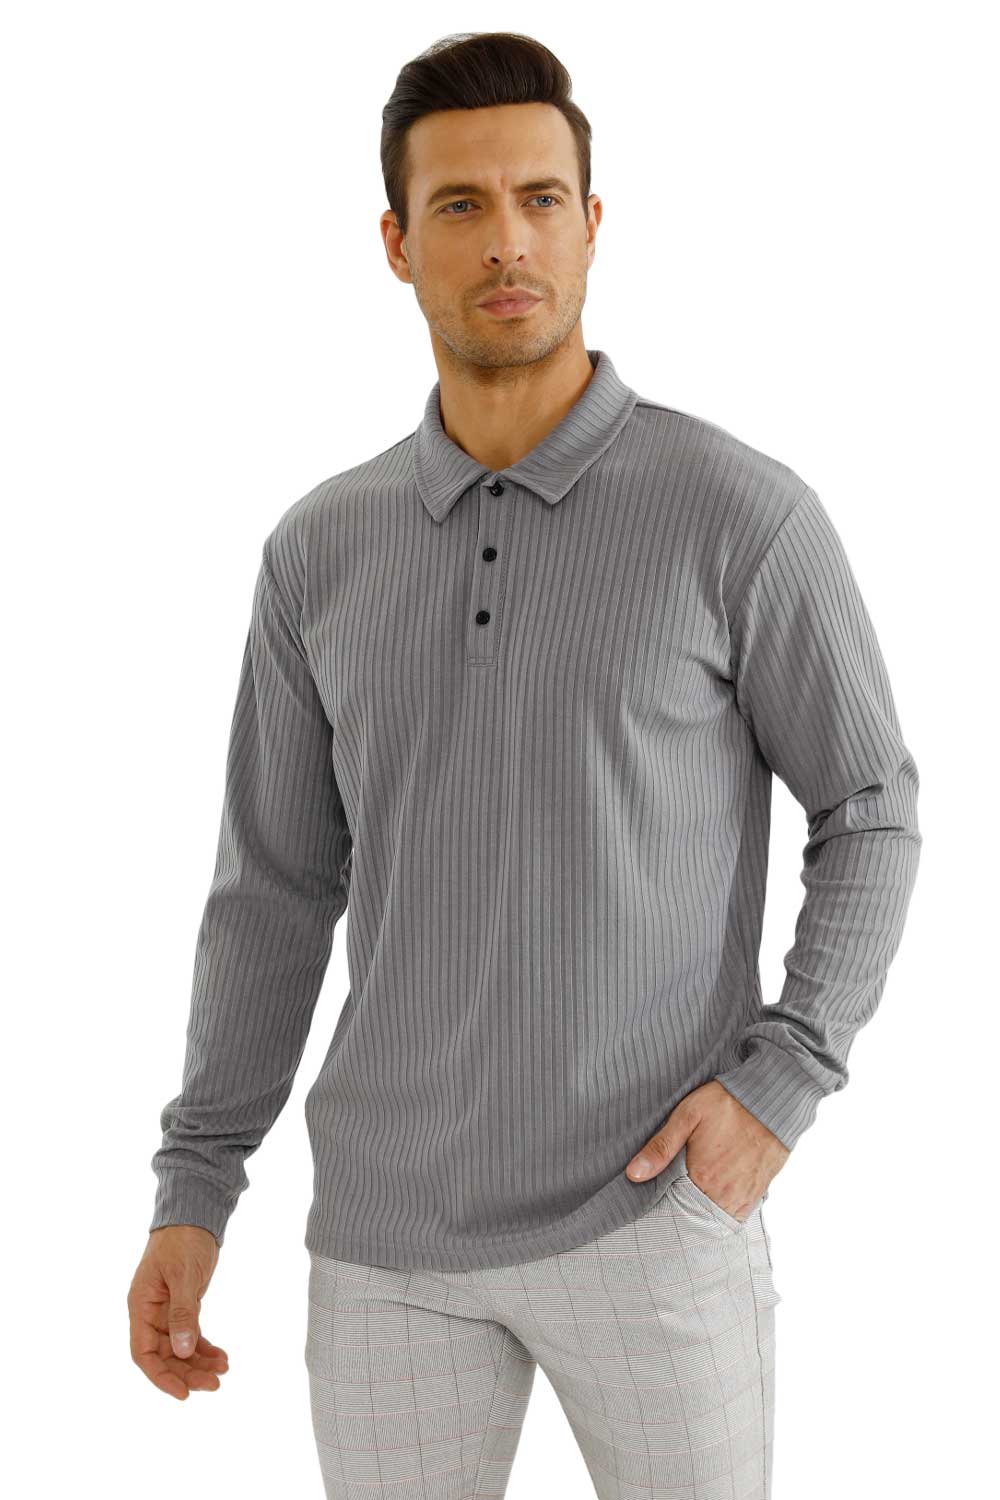 Gingtto's Men's Classic Polo Shirts: Tailored Fit, Ultimate Comfort